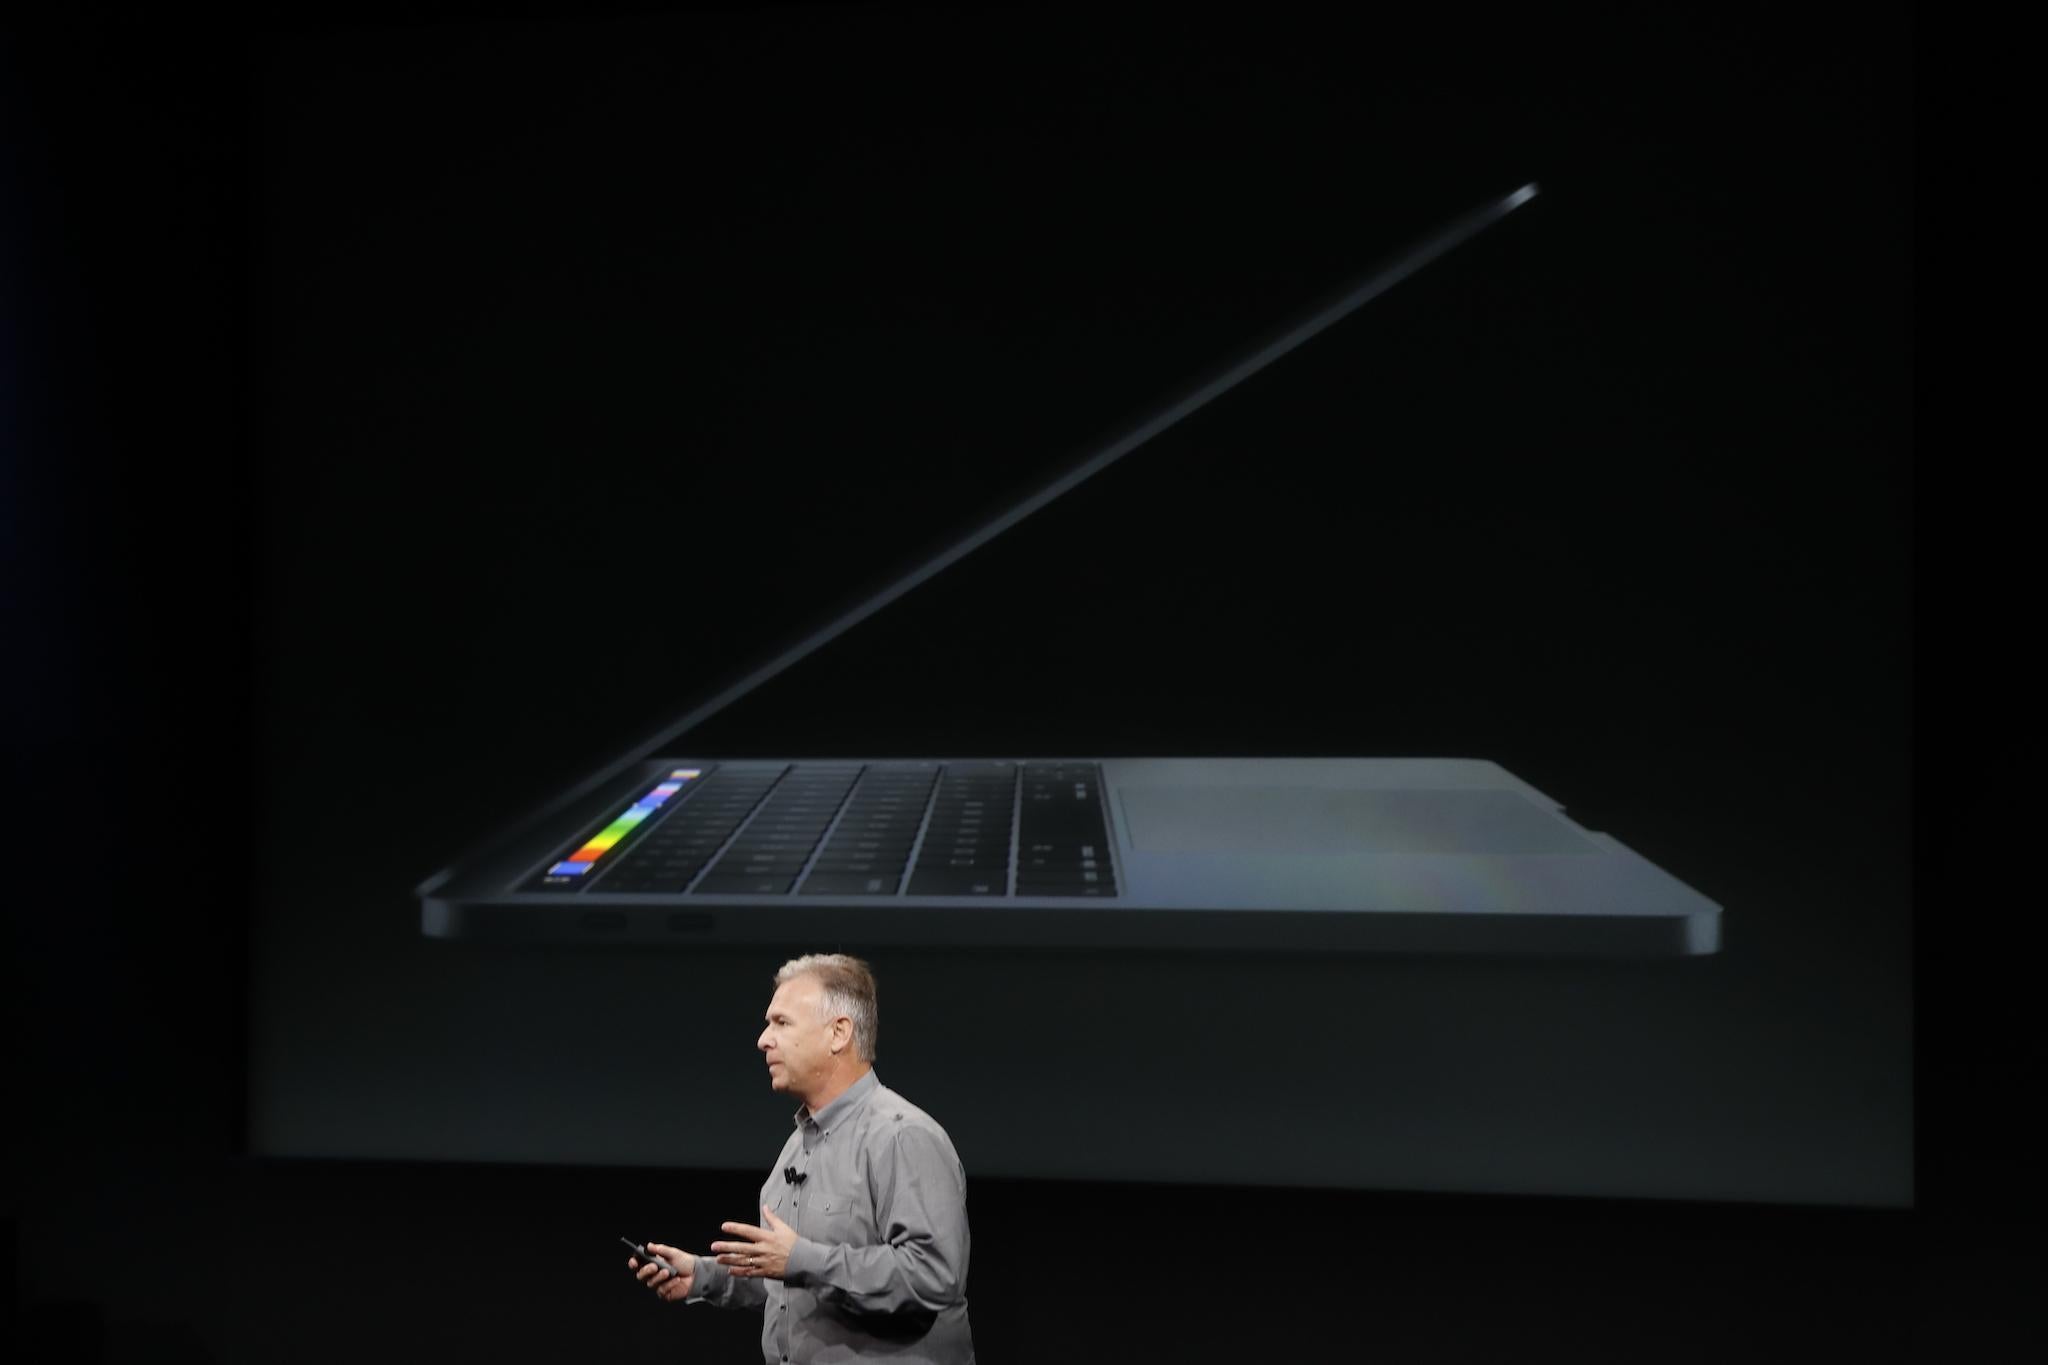 Apple Senior Vice President of Worldwide Marketing Phil Schiller introduces the all-new MacBook Pro during a product launch event on October 27, 2016 in Cupertino, California